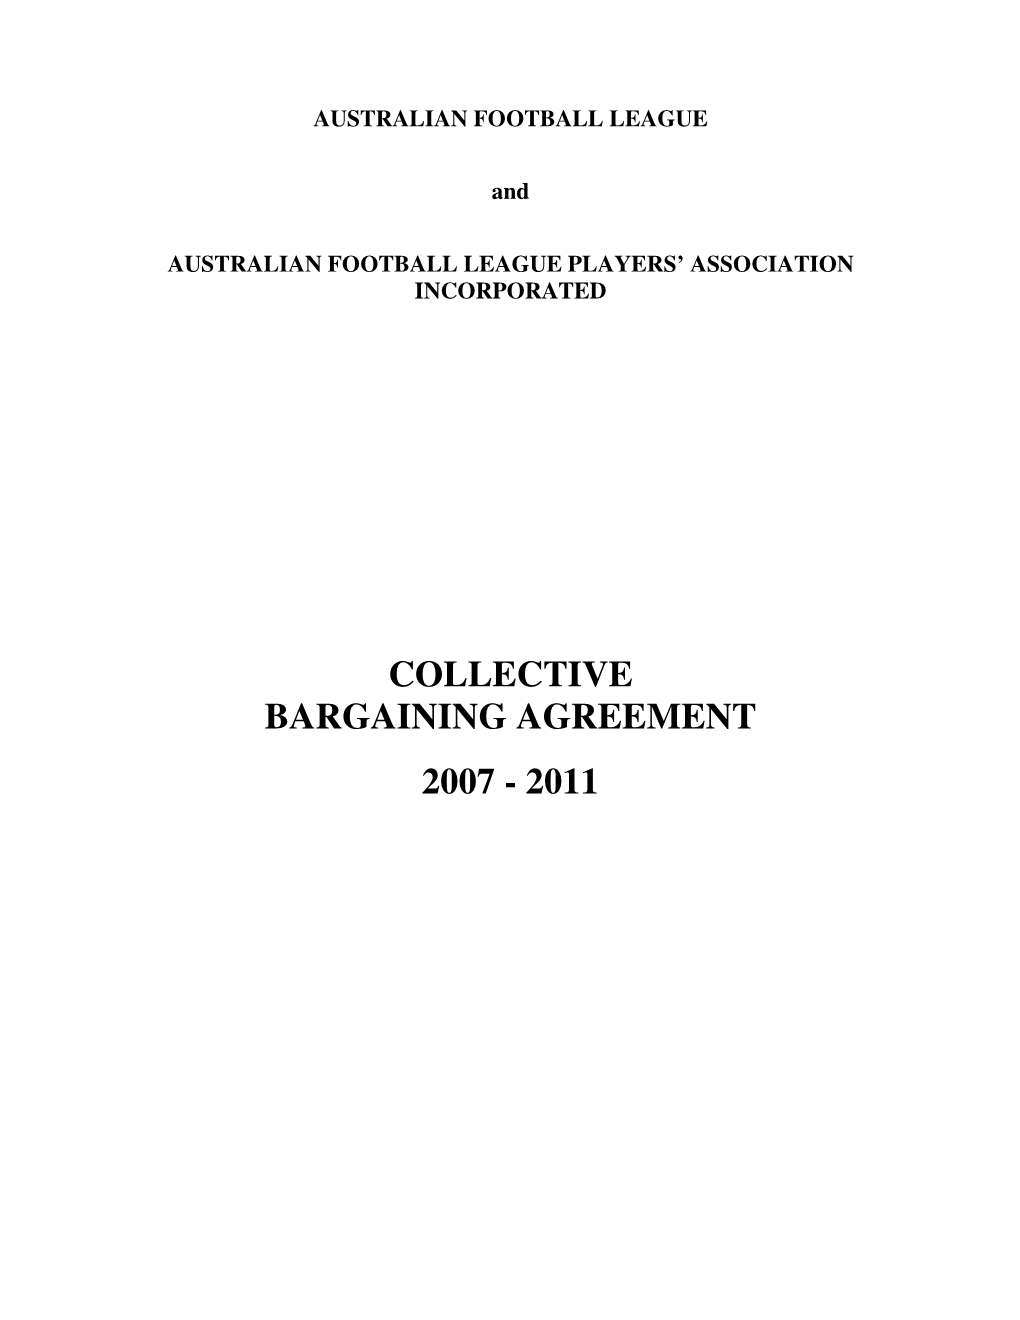 Collective Bargaining Agreement 2007